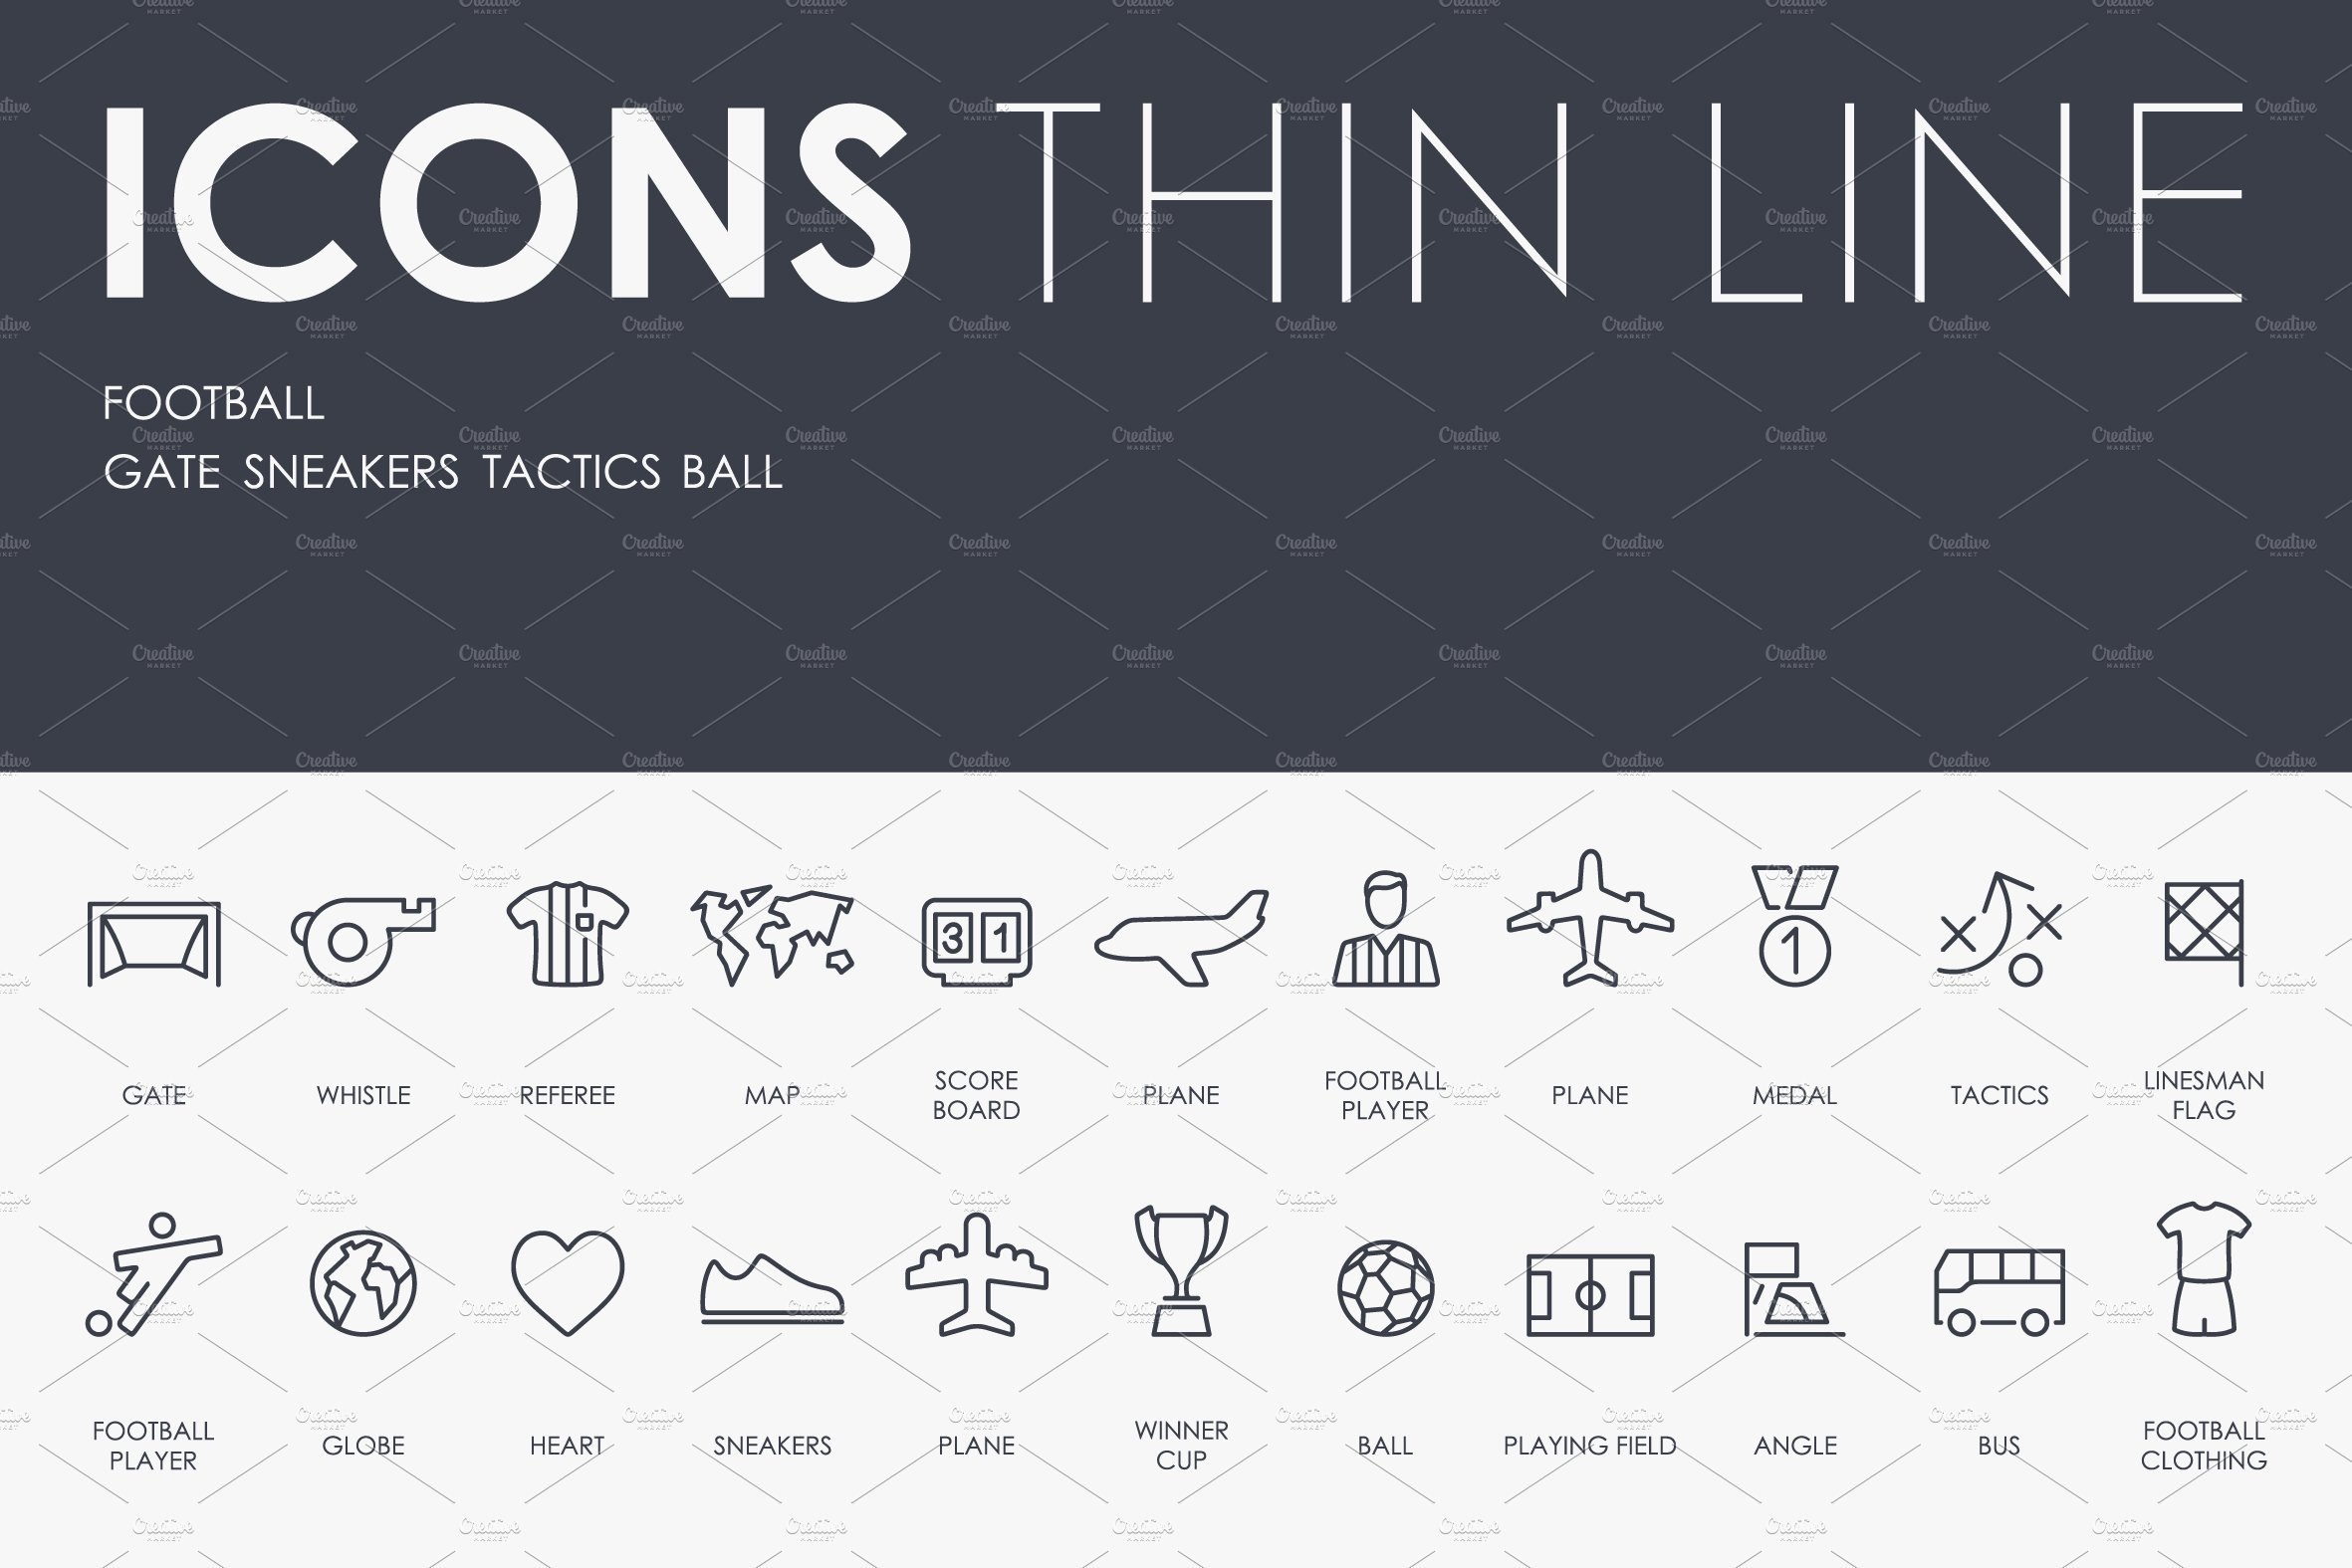 Football thinline icons cover image.